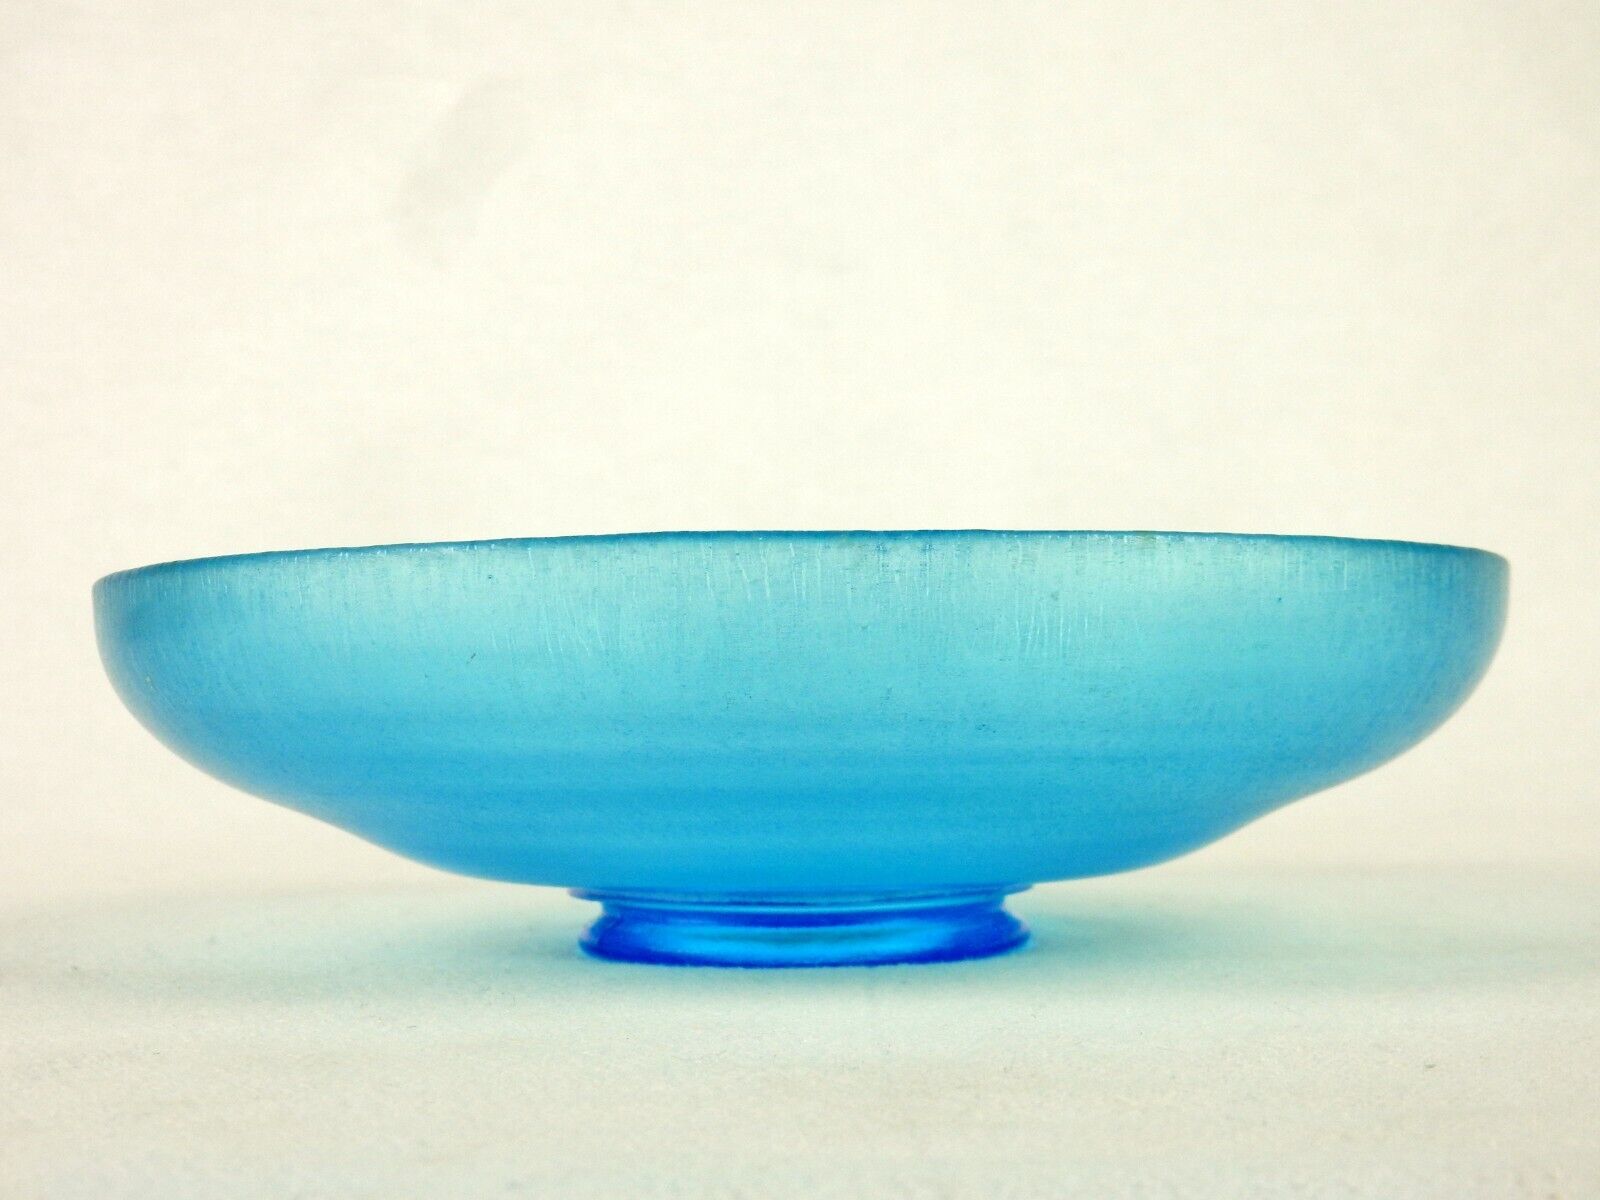 Primary image for Stretch Glass 8" Shallow Bowl, Frosted Aqua Blue, Vintage Candy Dish, Potpourri